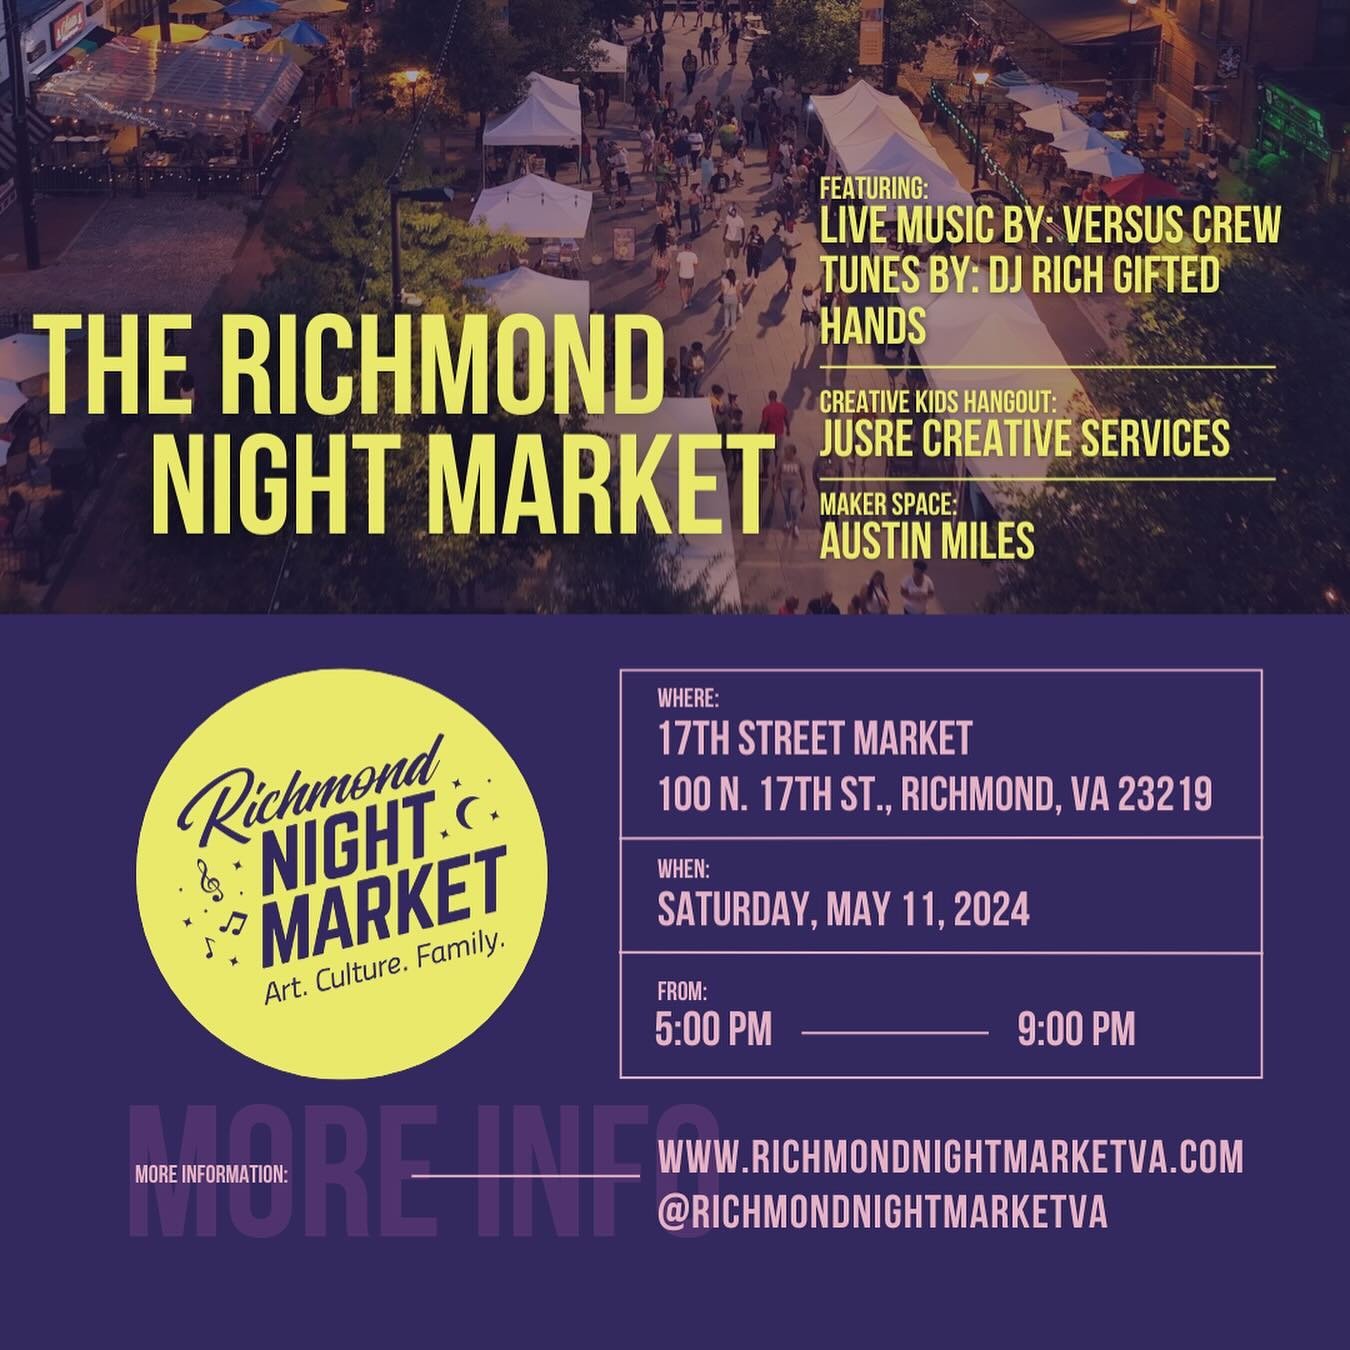 Save the date! 
📆 Join us Saturday, May 11th, for an evening filled with excitement at the Richmond Night Market. From 5pm until 9pm, immerse yourself in a world of creativity and fun!
🌟 Don&rsquo;t miss out on the chance to explore the sounds of @